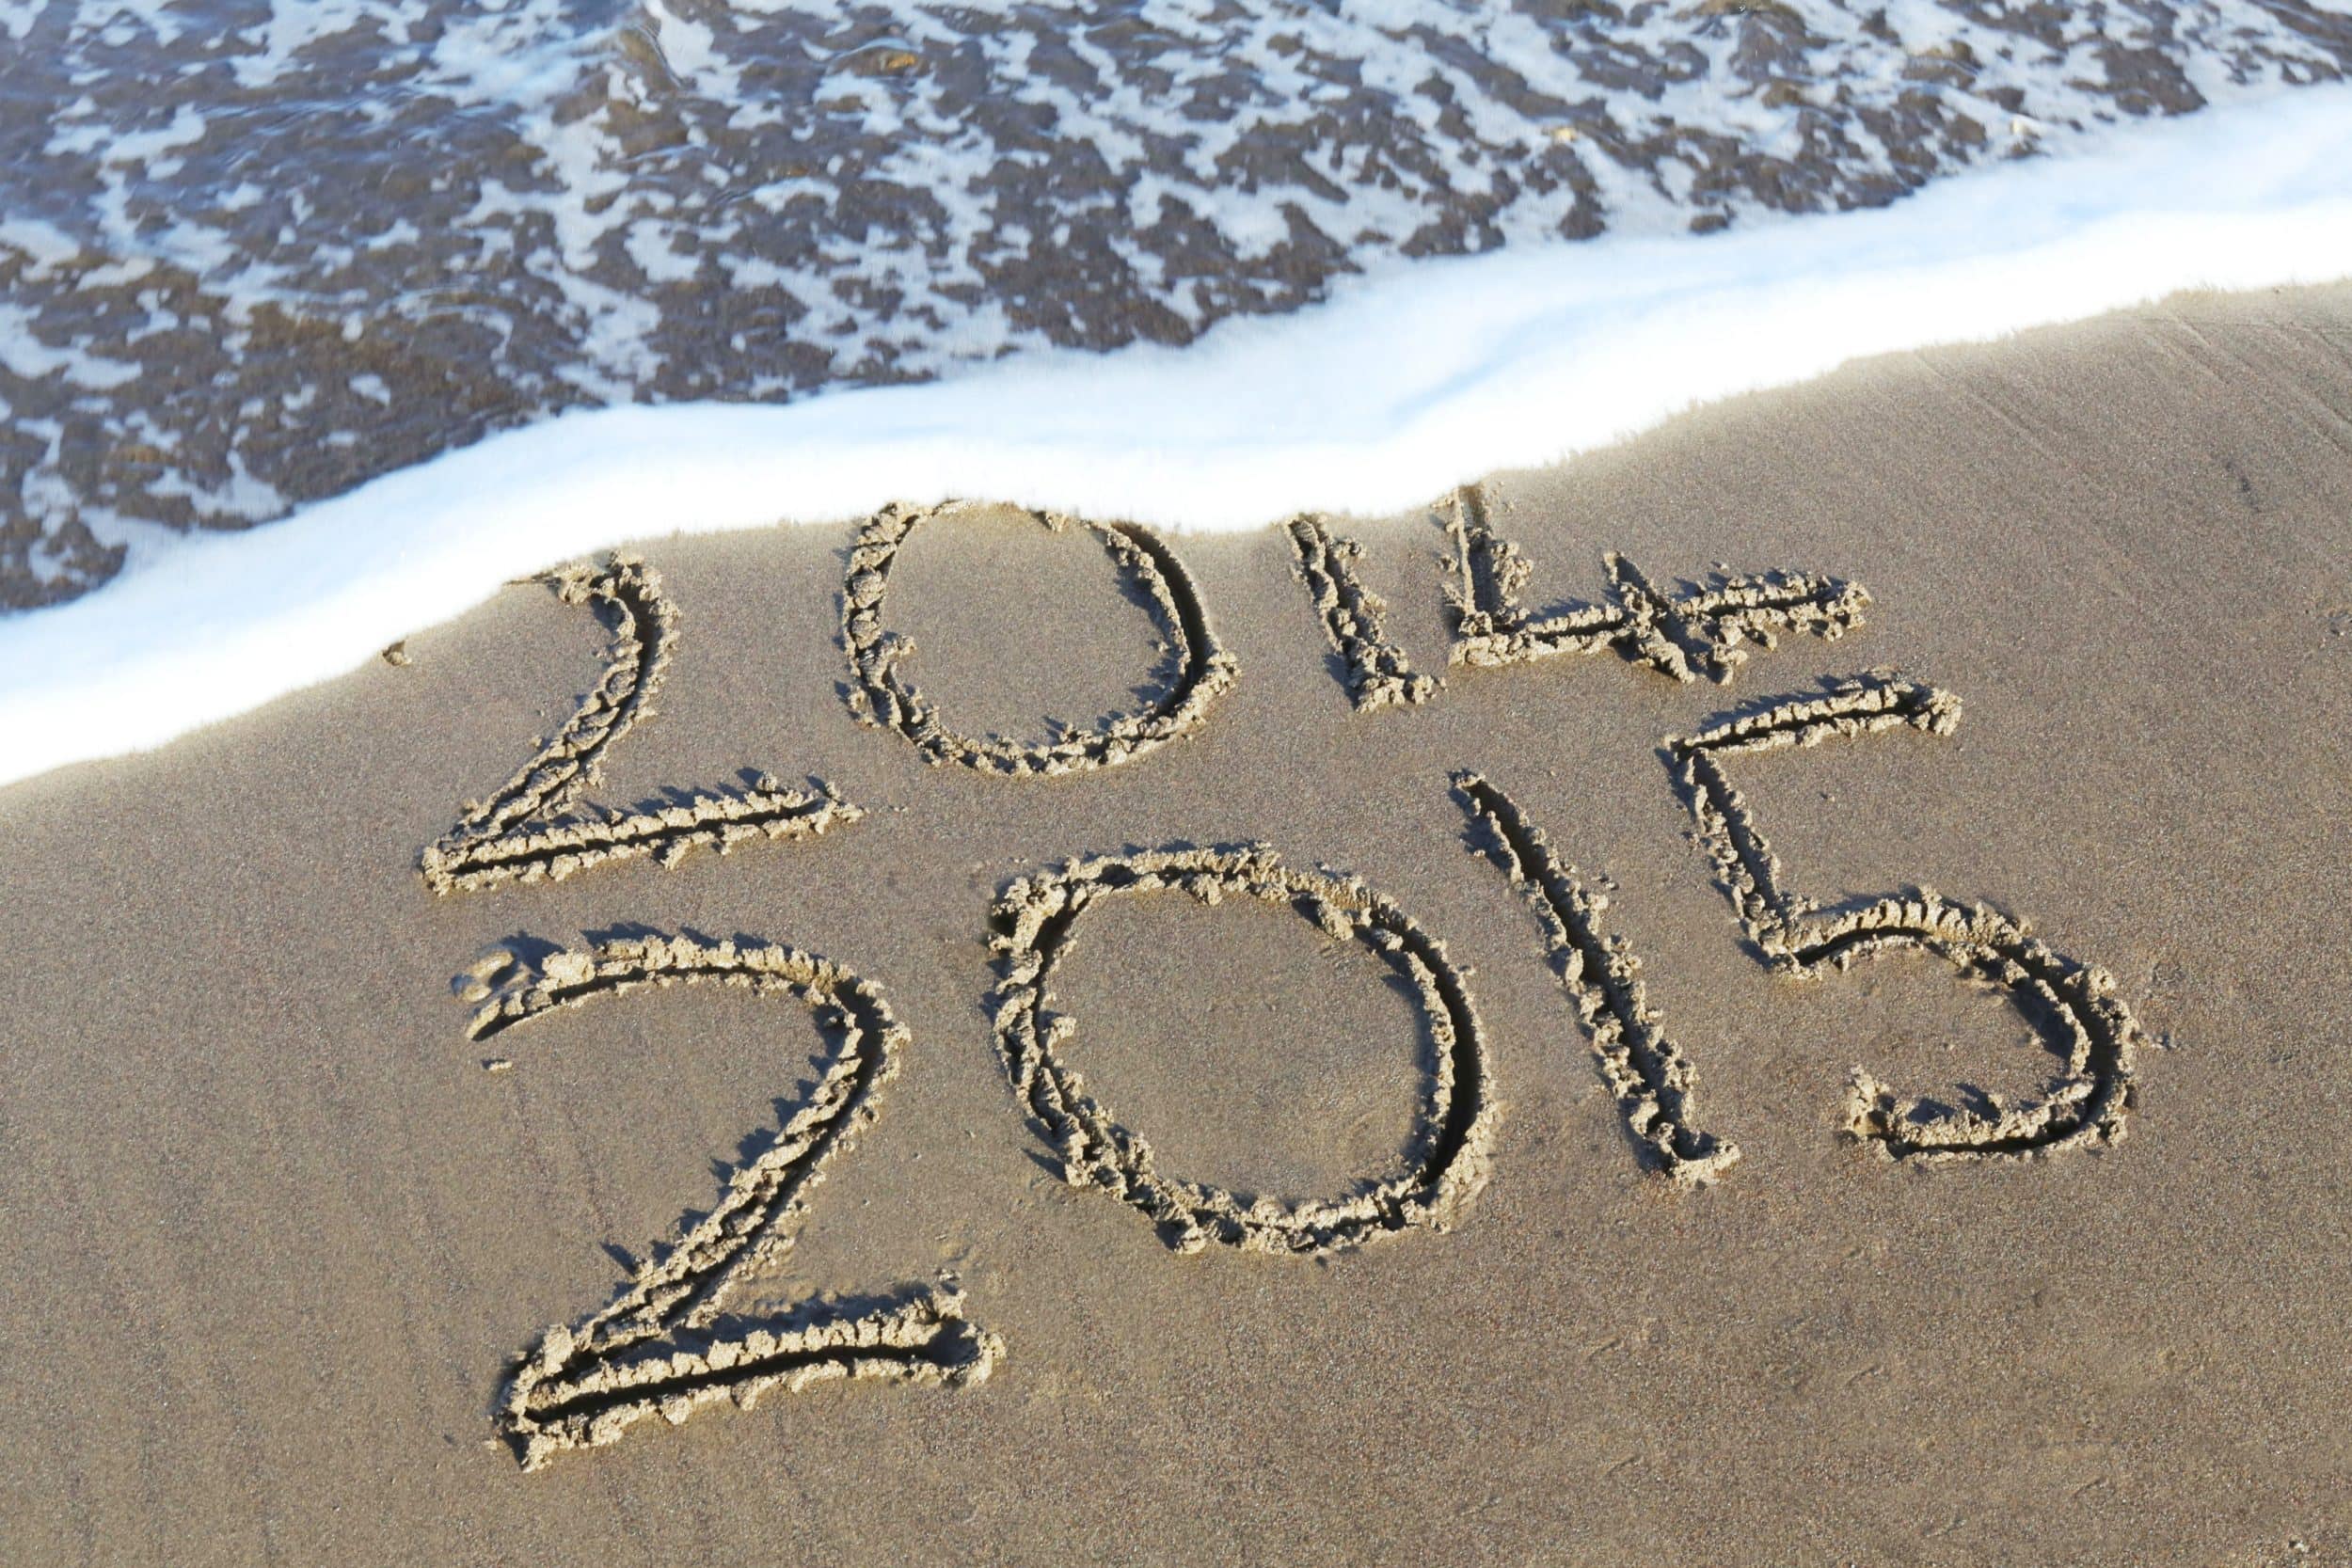 new years tide going out from 2014 to 2015